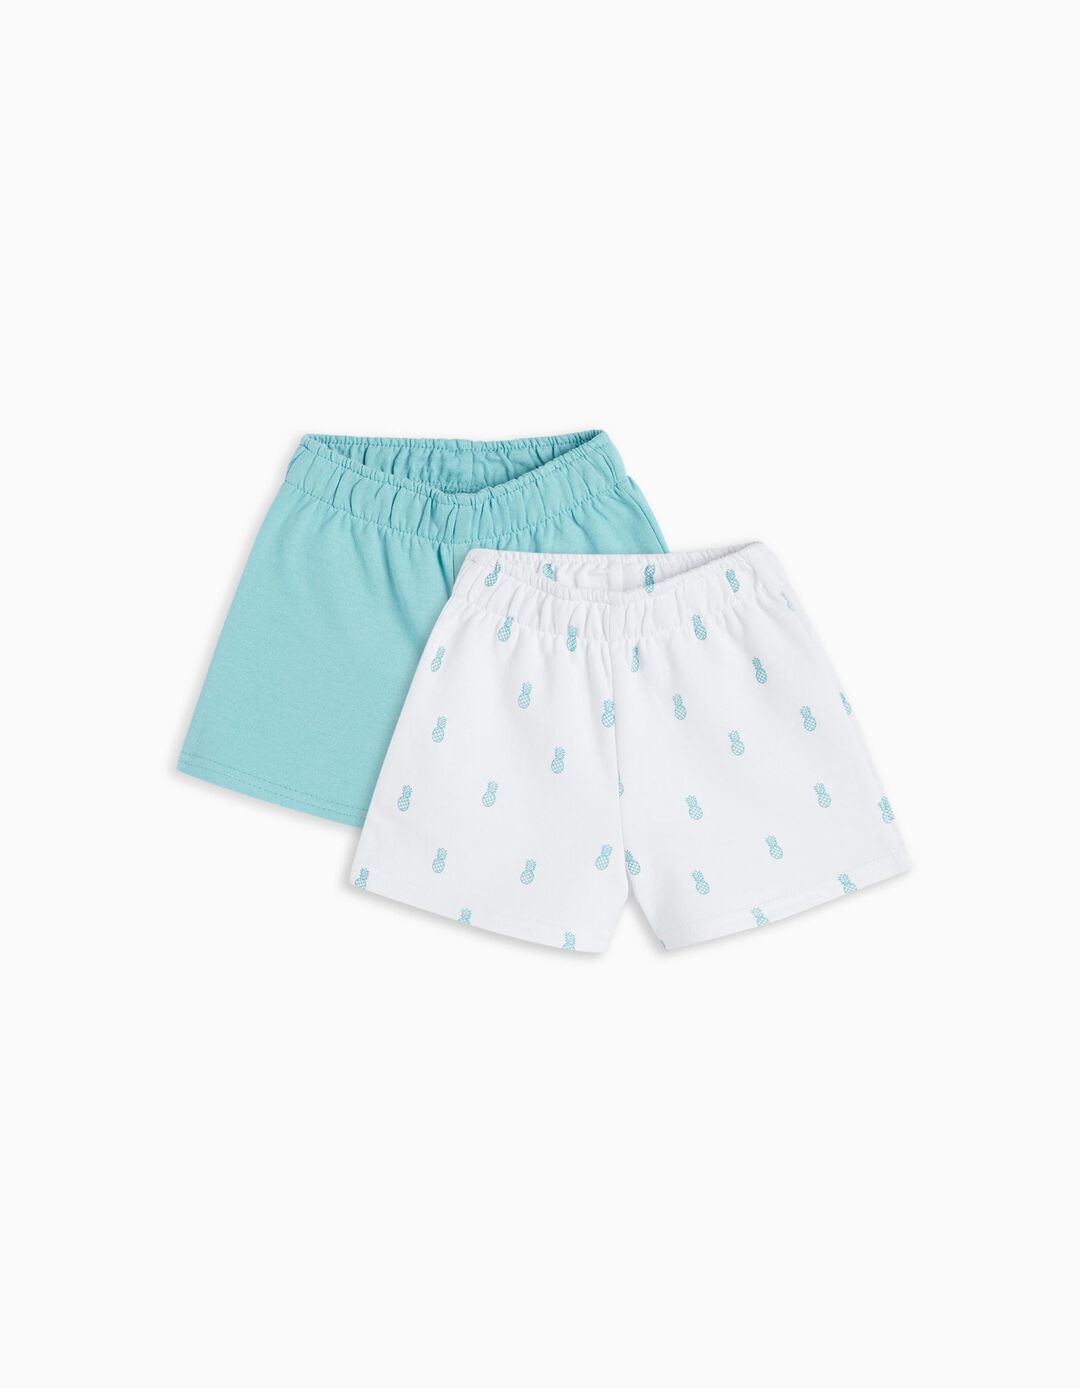 2 Shorts Pack, Baby Girls, Multicolour